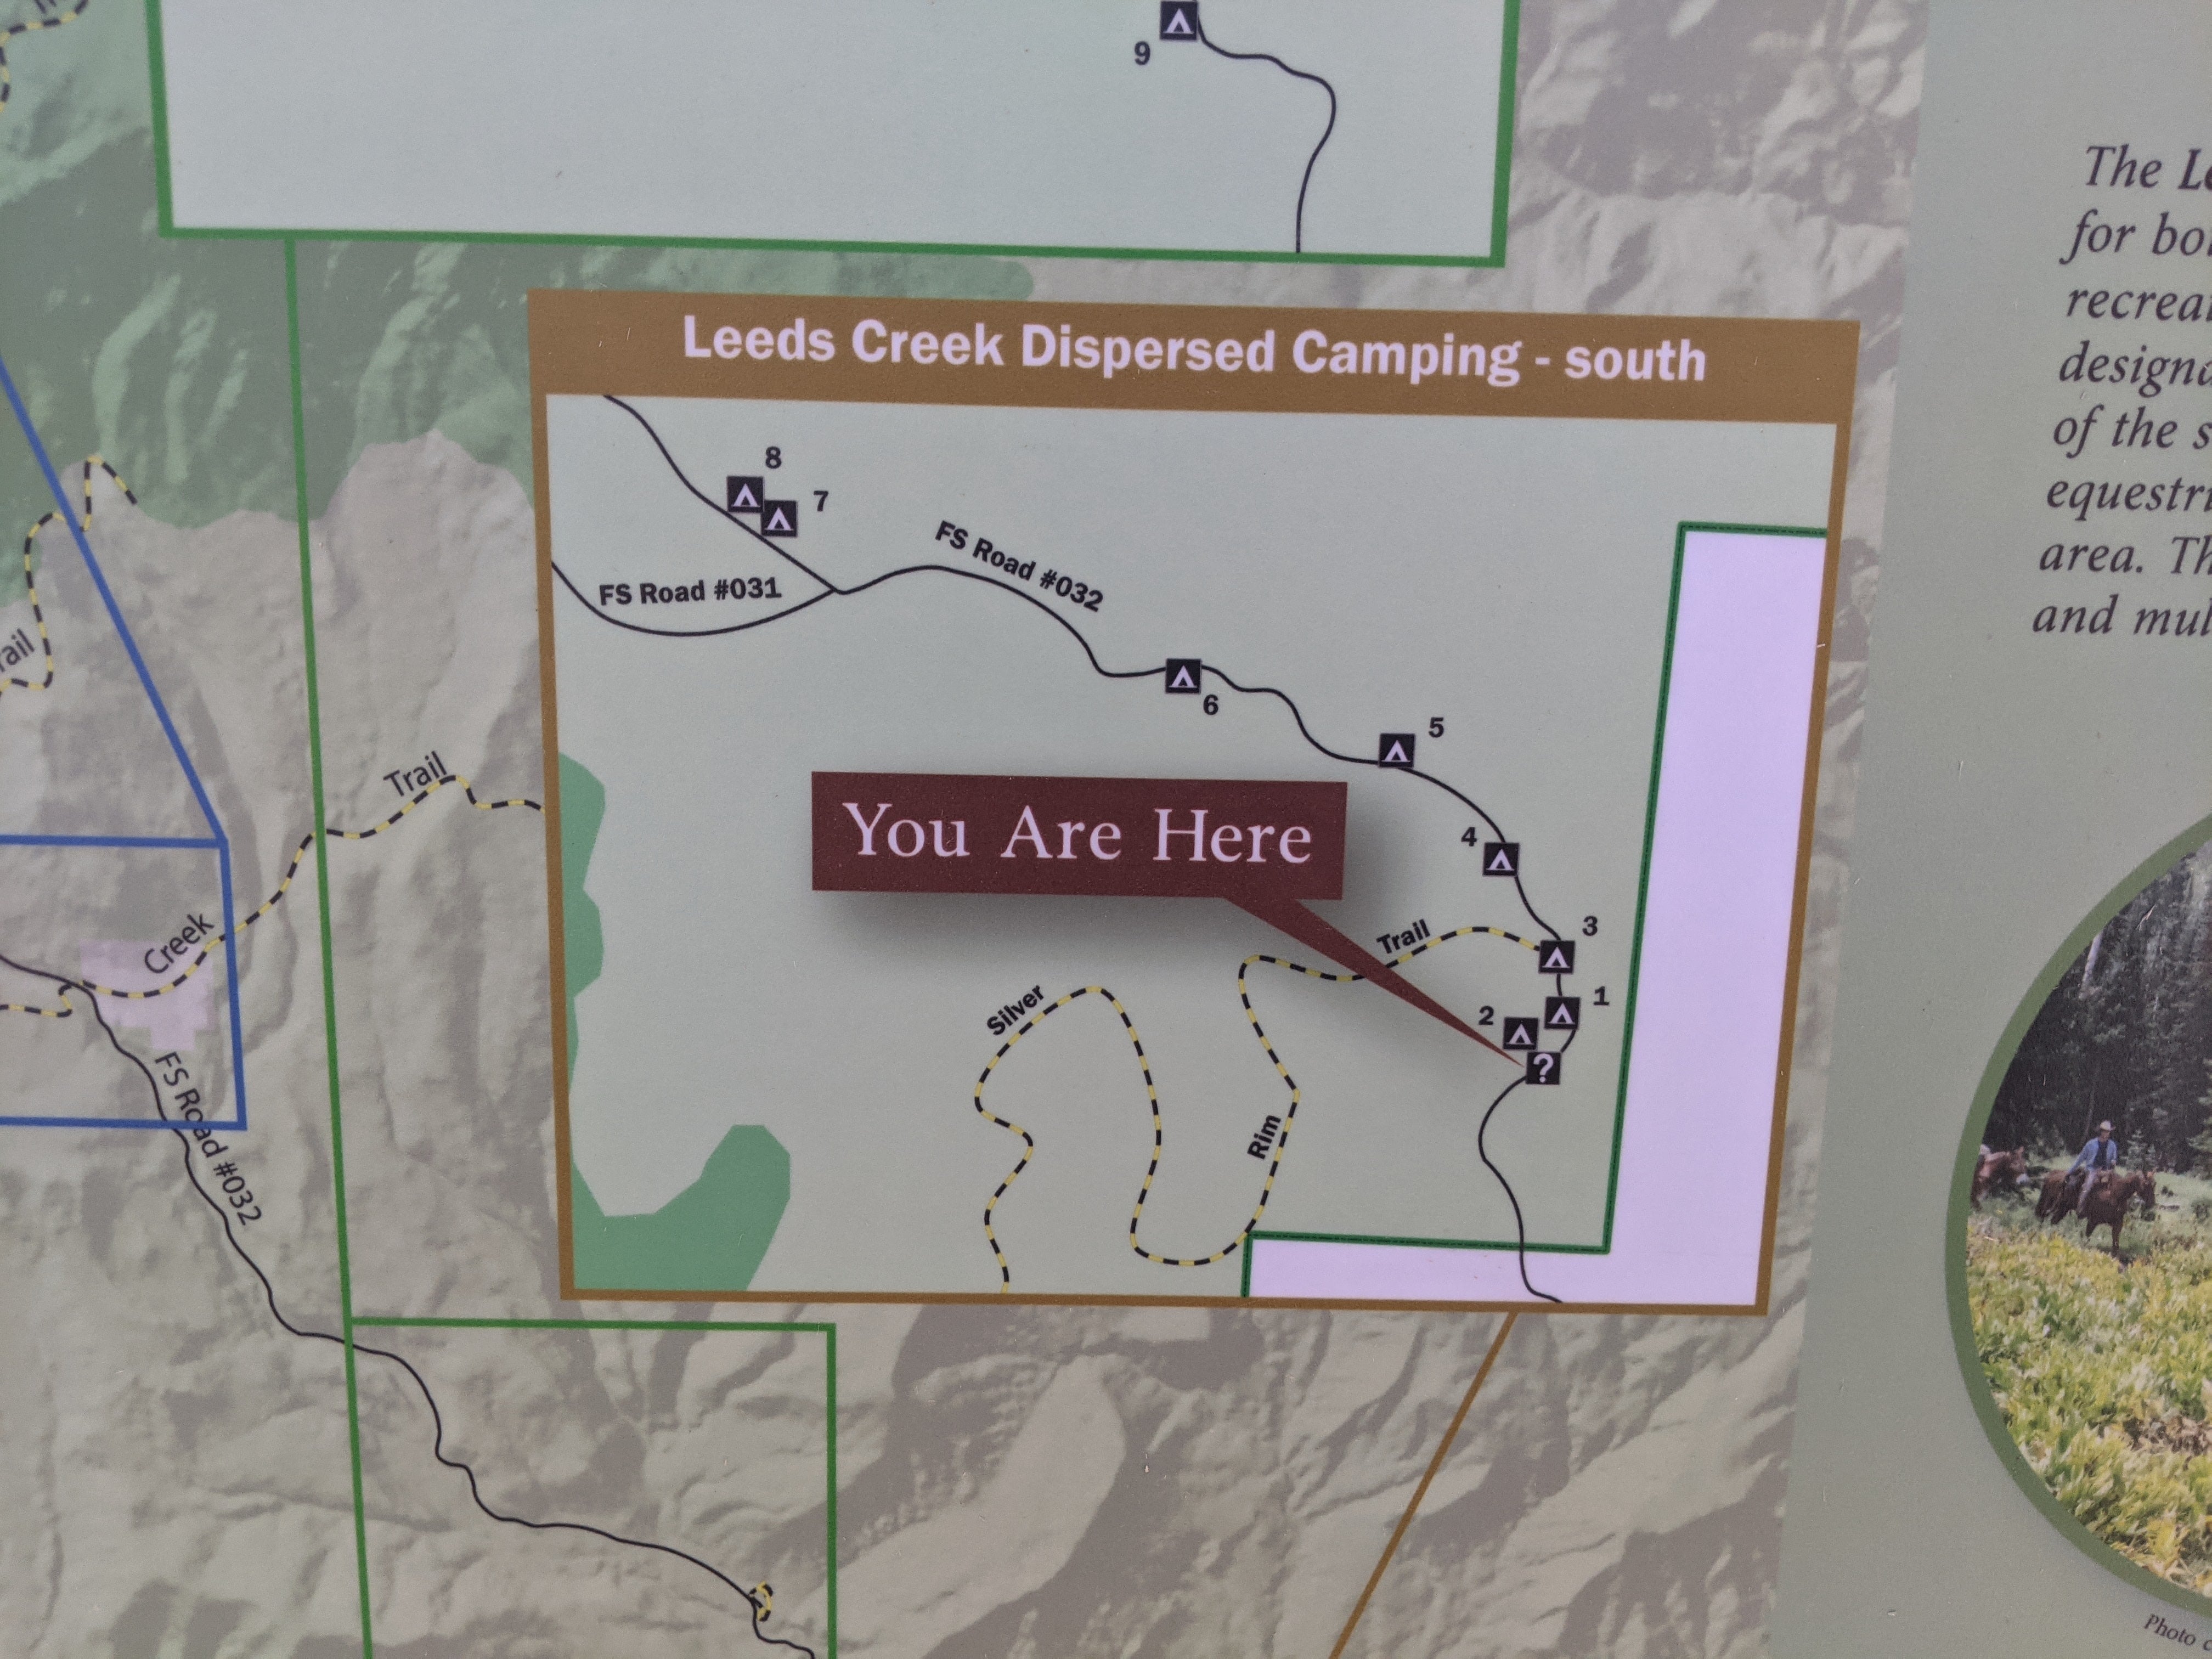 Camper submitted image from Leeds Canyon Dispersed #6 - 5